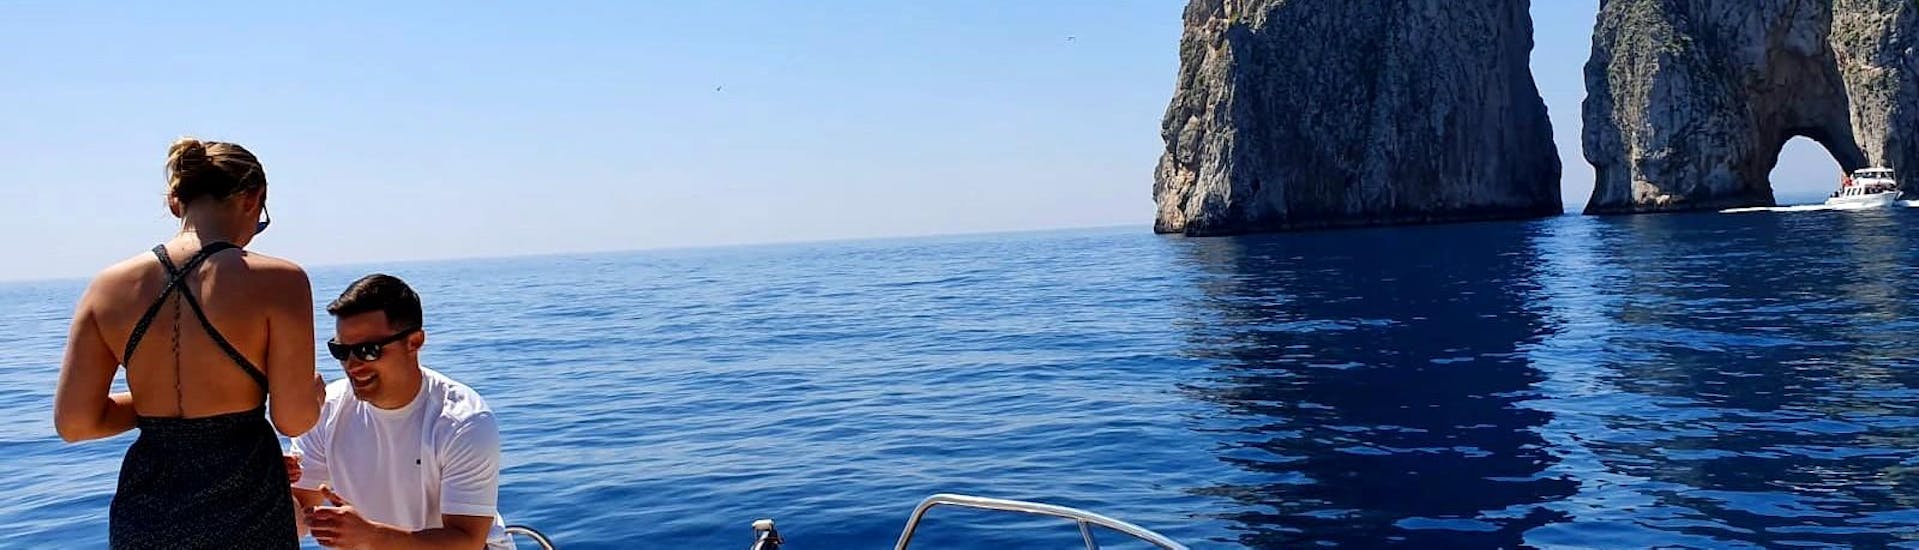 A man is proposing to his fiancé during the Private Boat Trip from Sorrento to Capri.